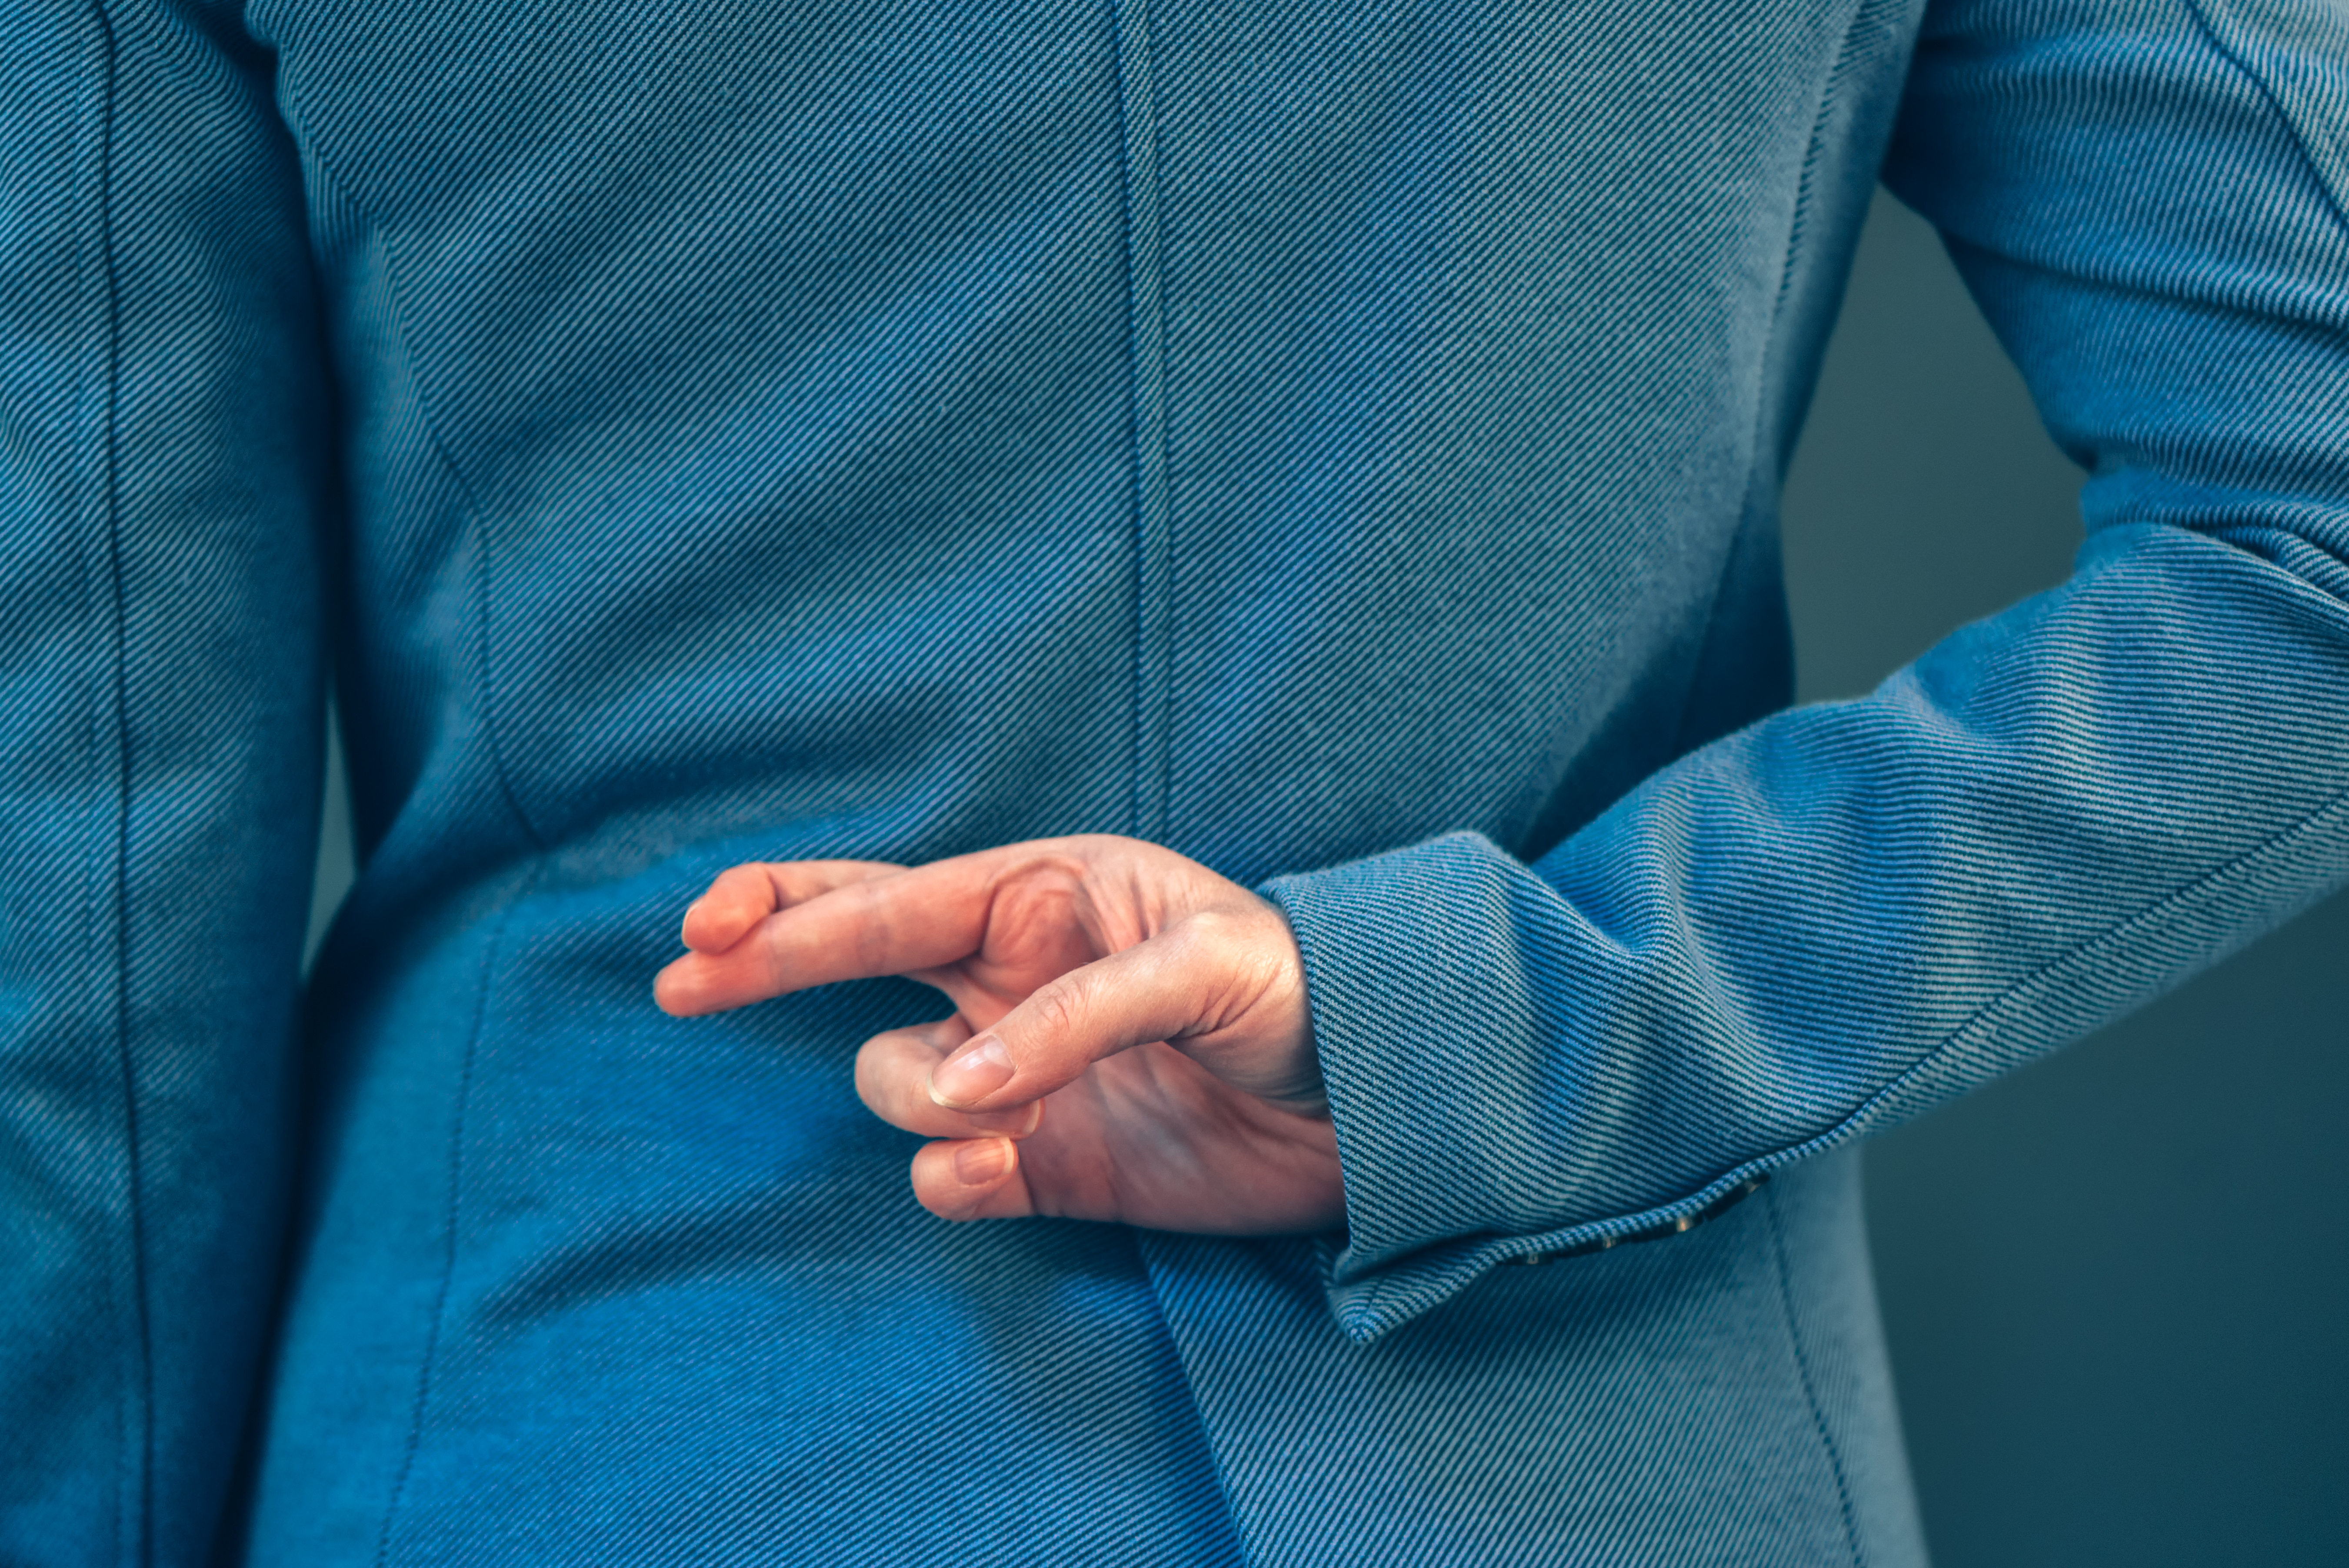 A man secretively crossing his fingers behind his back. | Source: Getty Images